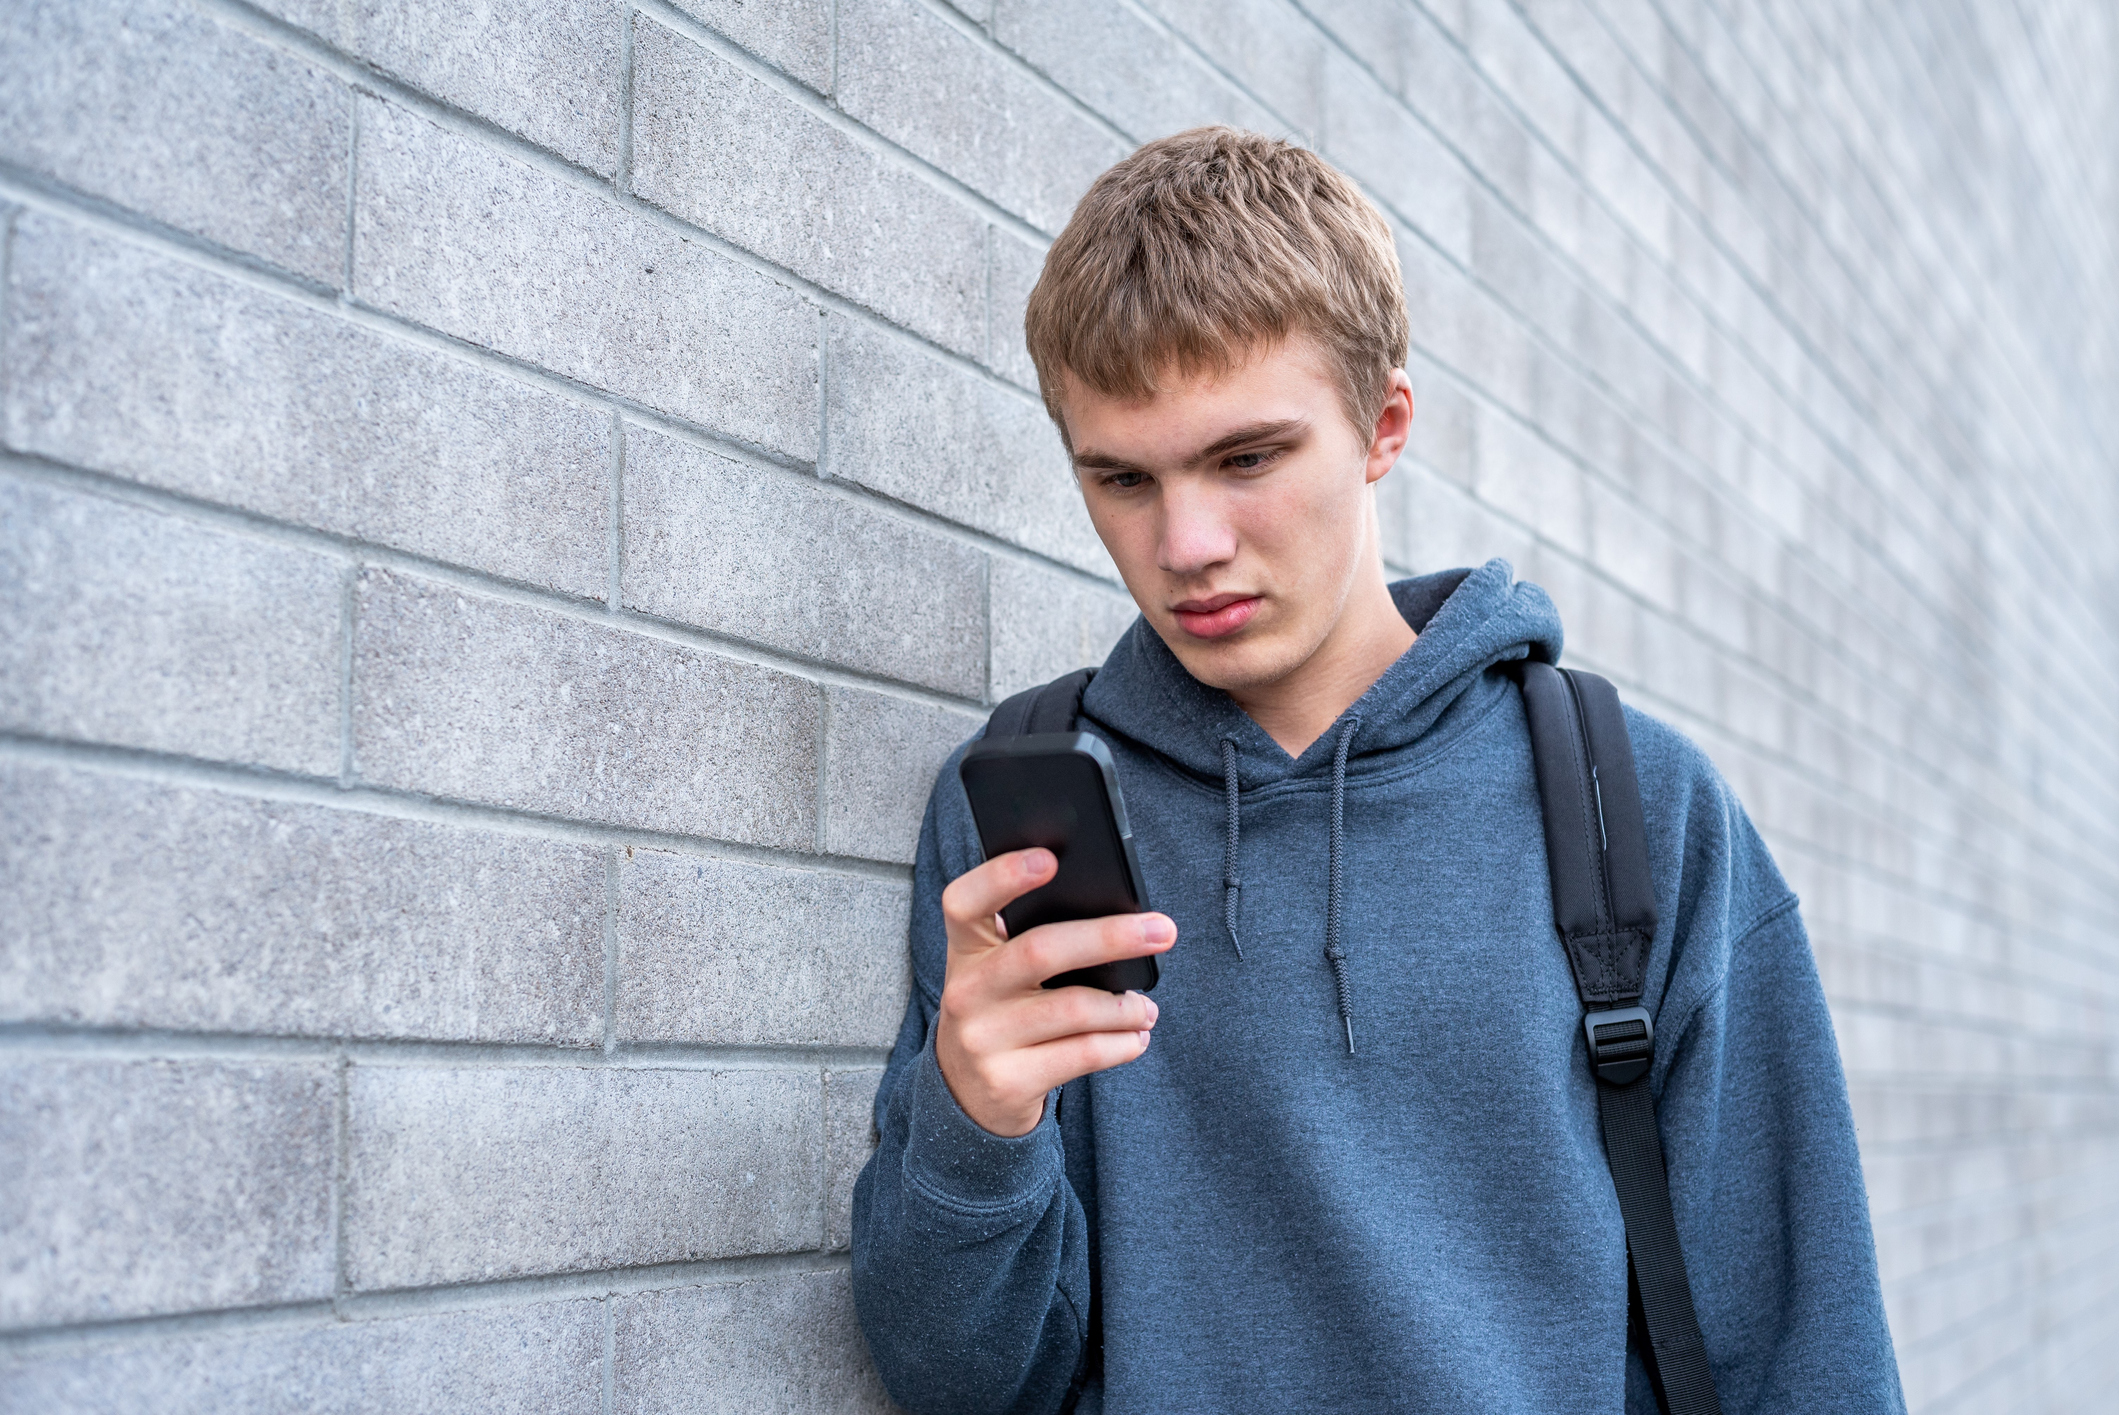 Counslr, the text-based mental health support mobile app, announced today that it has expanded its support into the State of South Dakota through a partnership with the Timber Lake School District. 